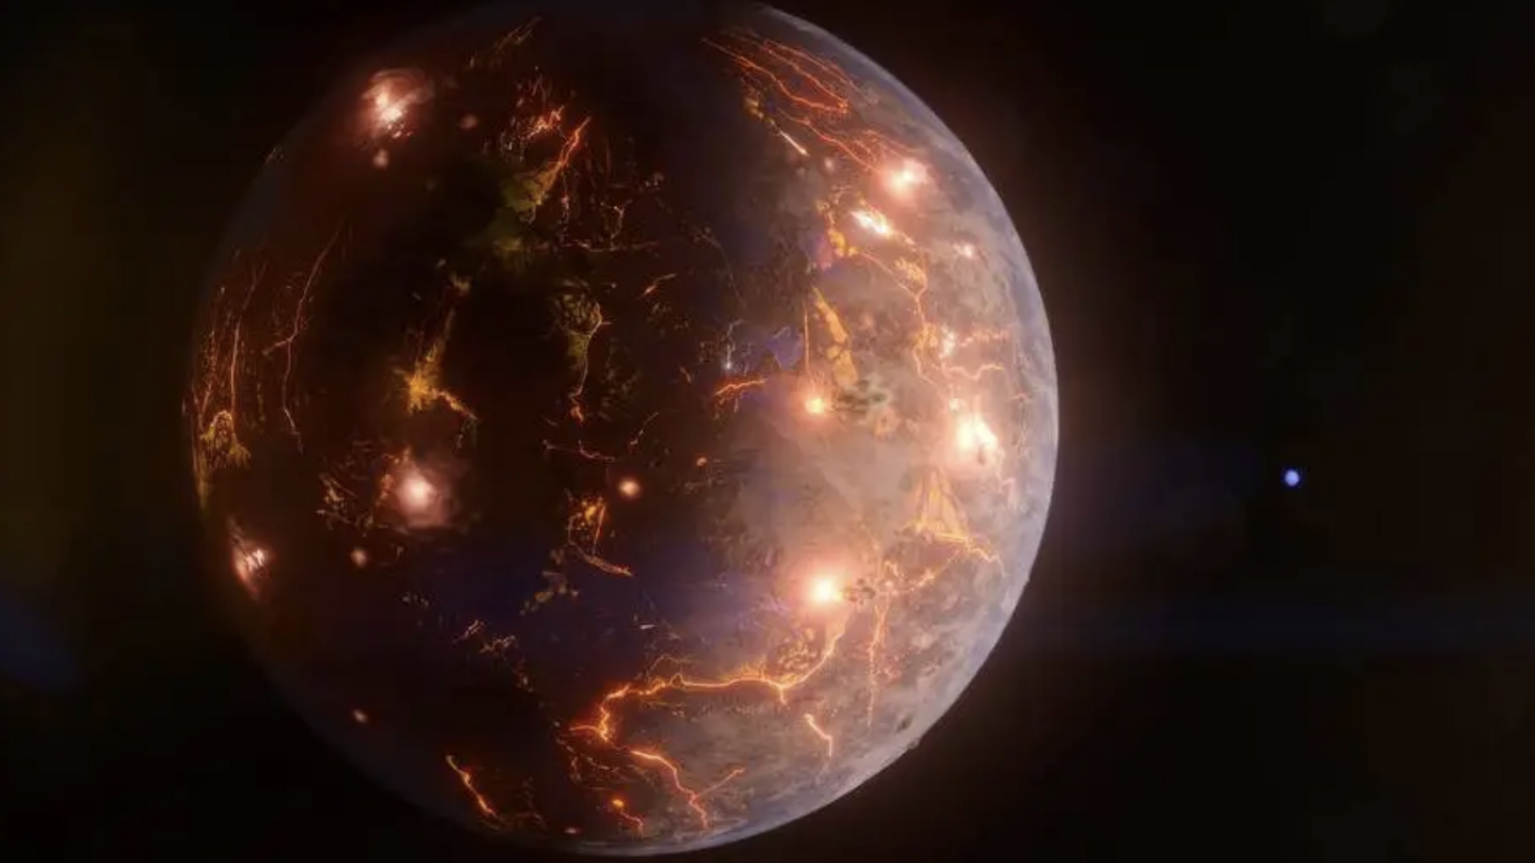 A NASA artist's conception of an exoplanet teeming with volcanism.